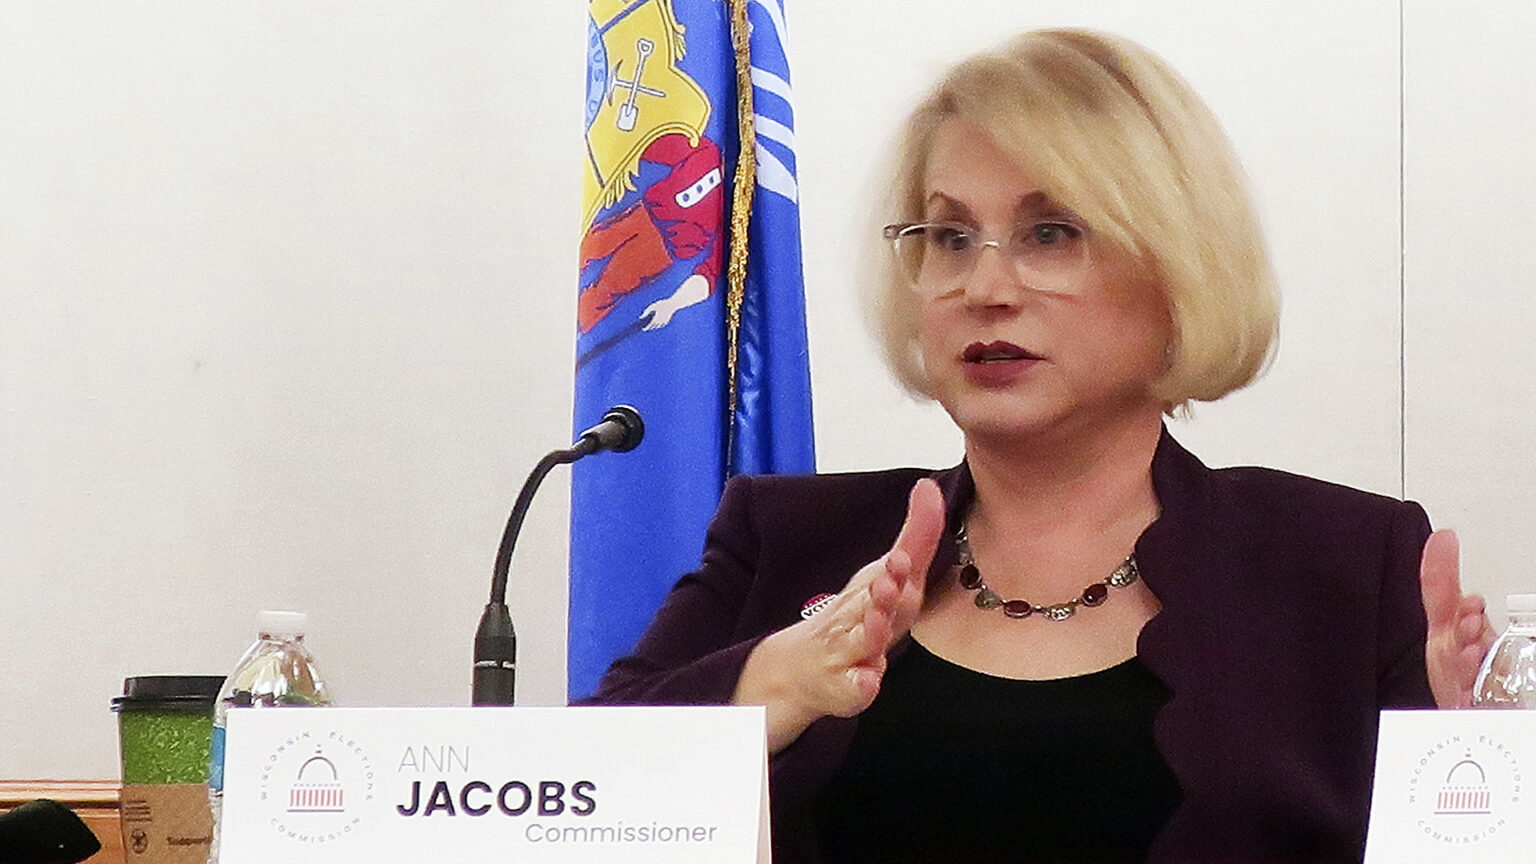 Ann Jacobs gestures with both hands and speaks into a microphone while seated at a table with a folded paper sign showing the logo of the Wisconsin Elections Commission and the words Ann Jacobs and Commissioner on its surface alongside a disposable coffee cup and plastic water bottle, with a Wisconsin flag in the background.